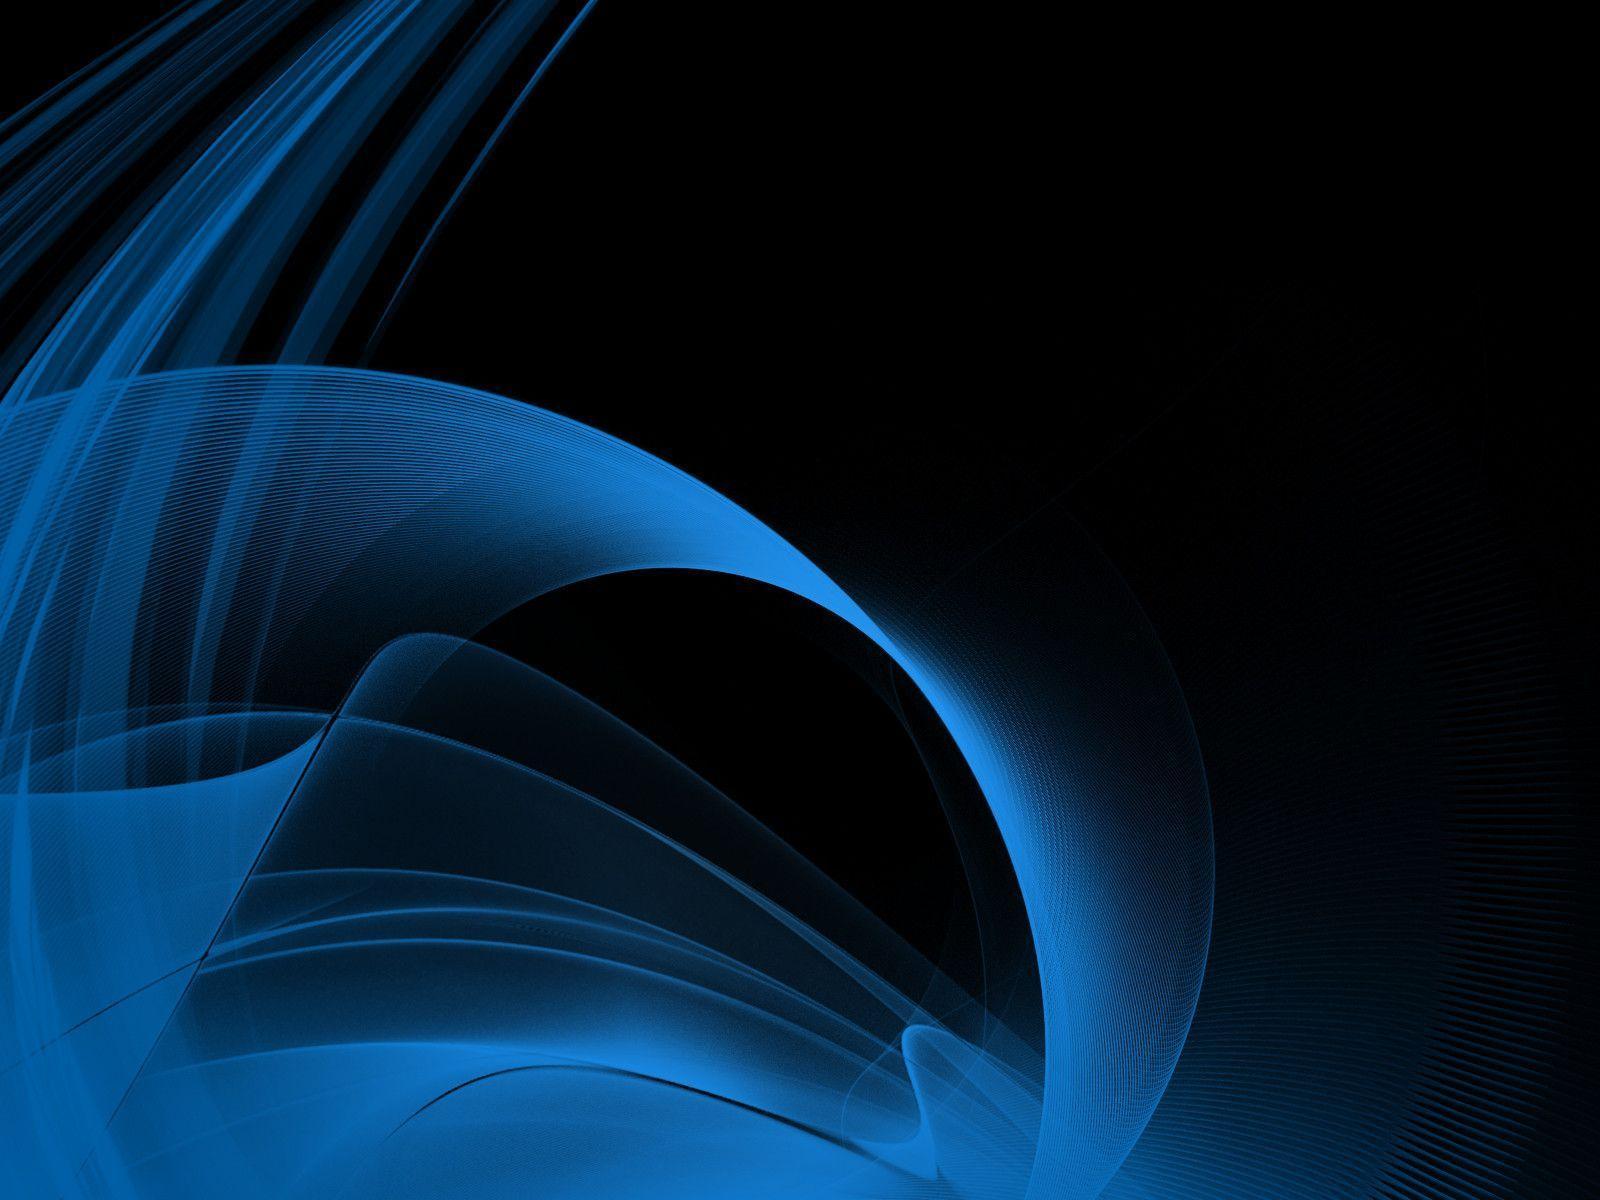 Black and Blue Abstract Free Live Wallpaper For Android Tablet